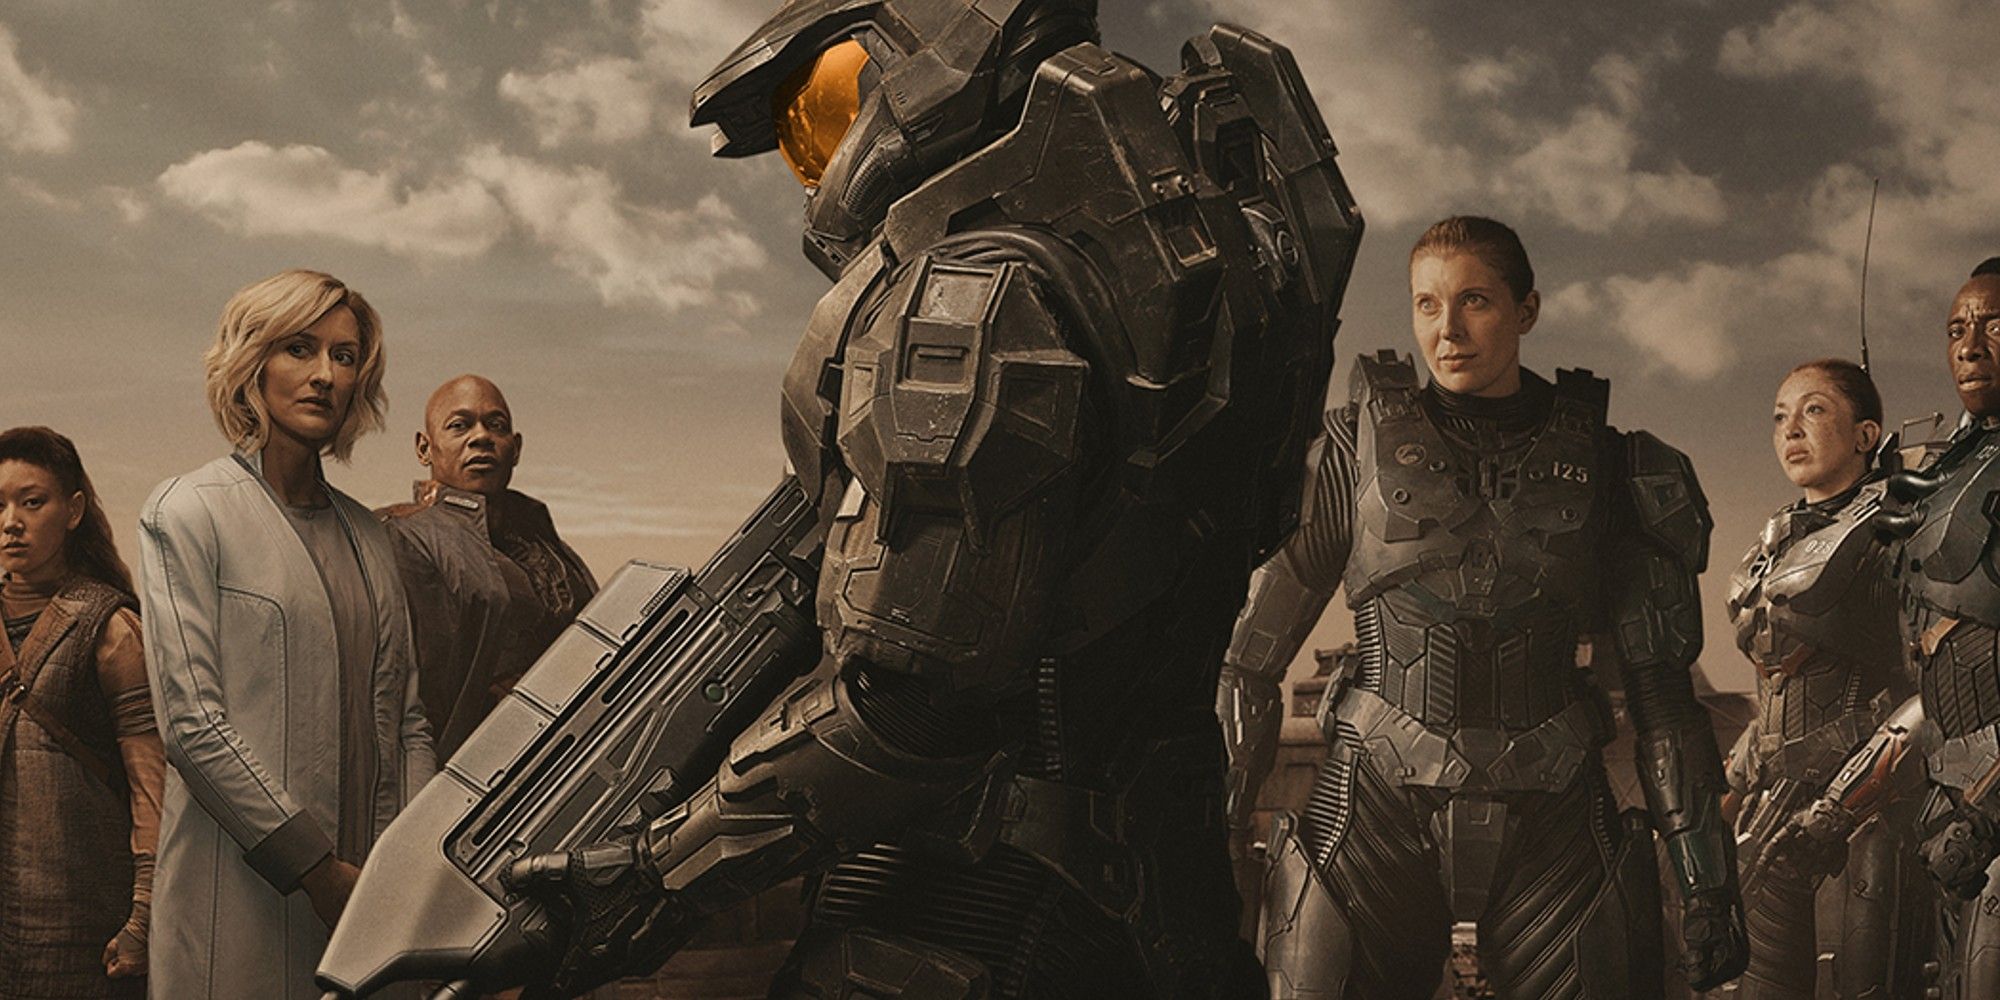 The cast of Halo standing side by side